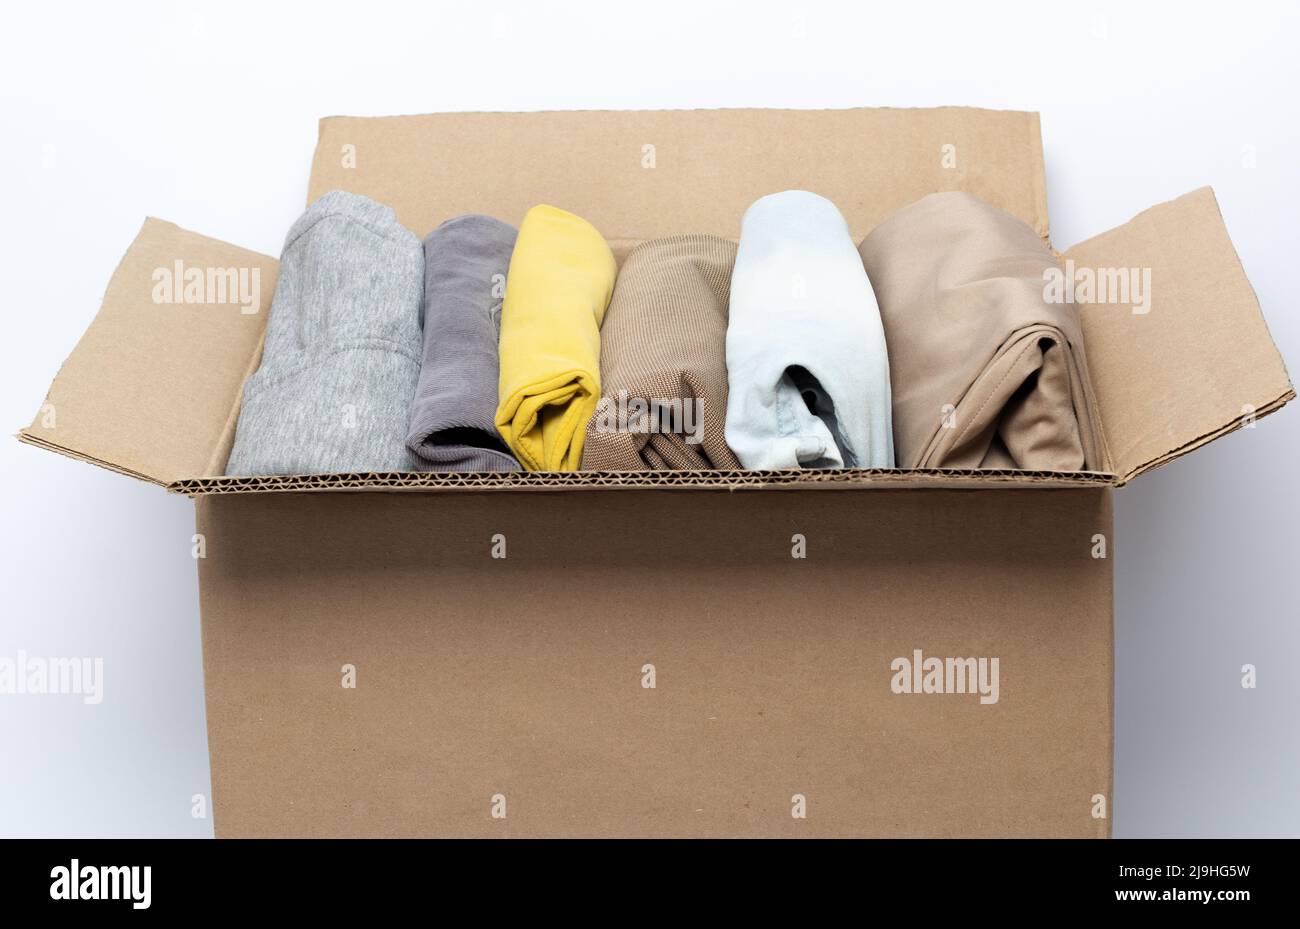 Donation clothes box on a white background. Charity concept. Waste recycling. Stock Photo